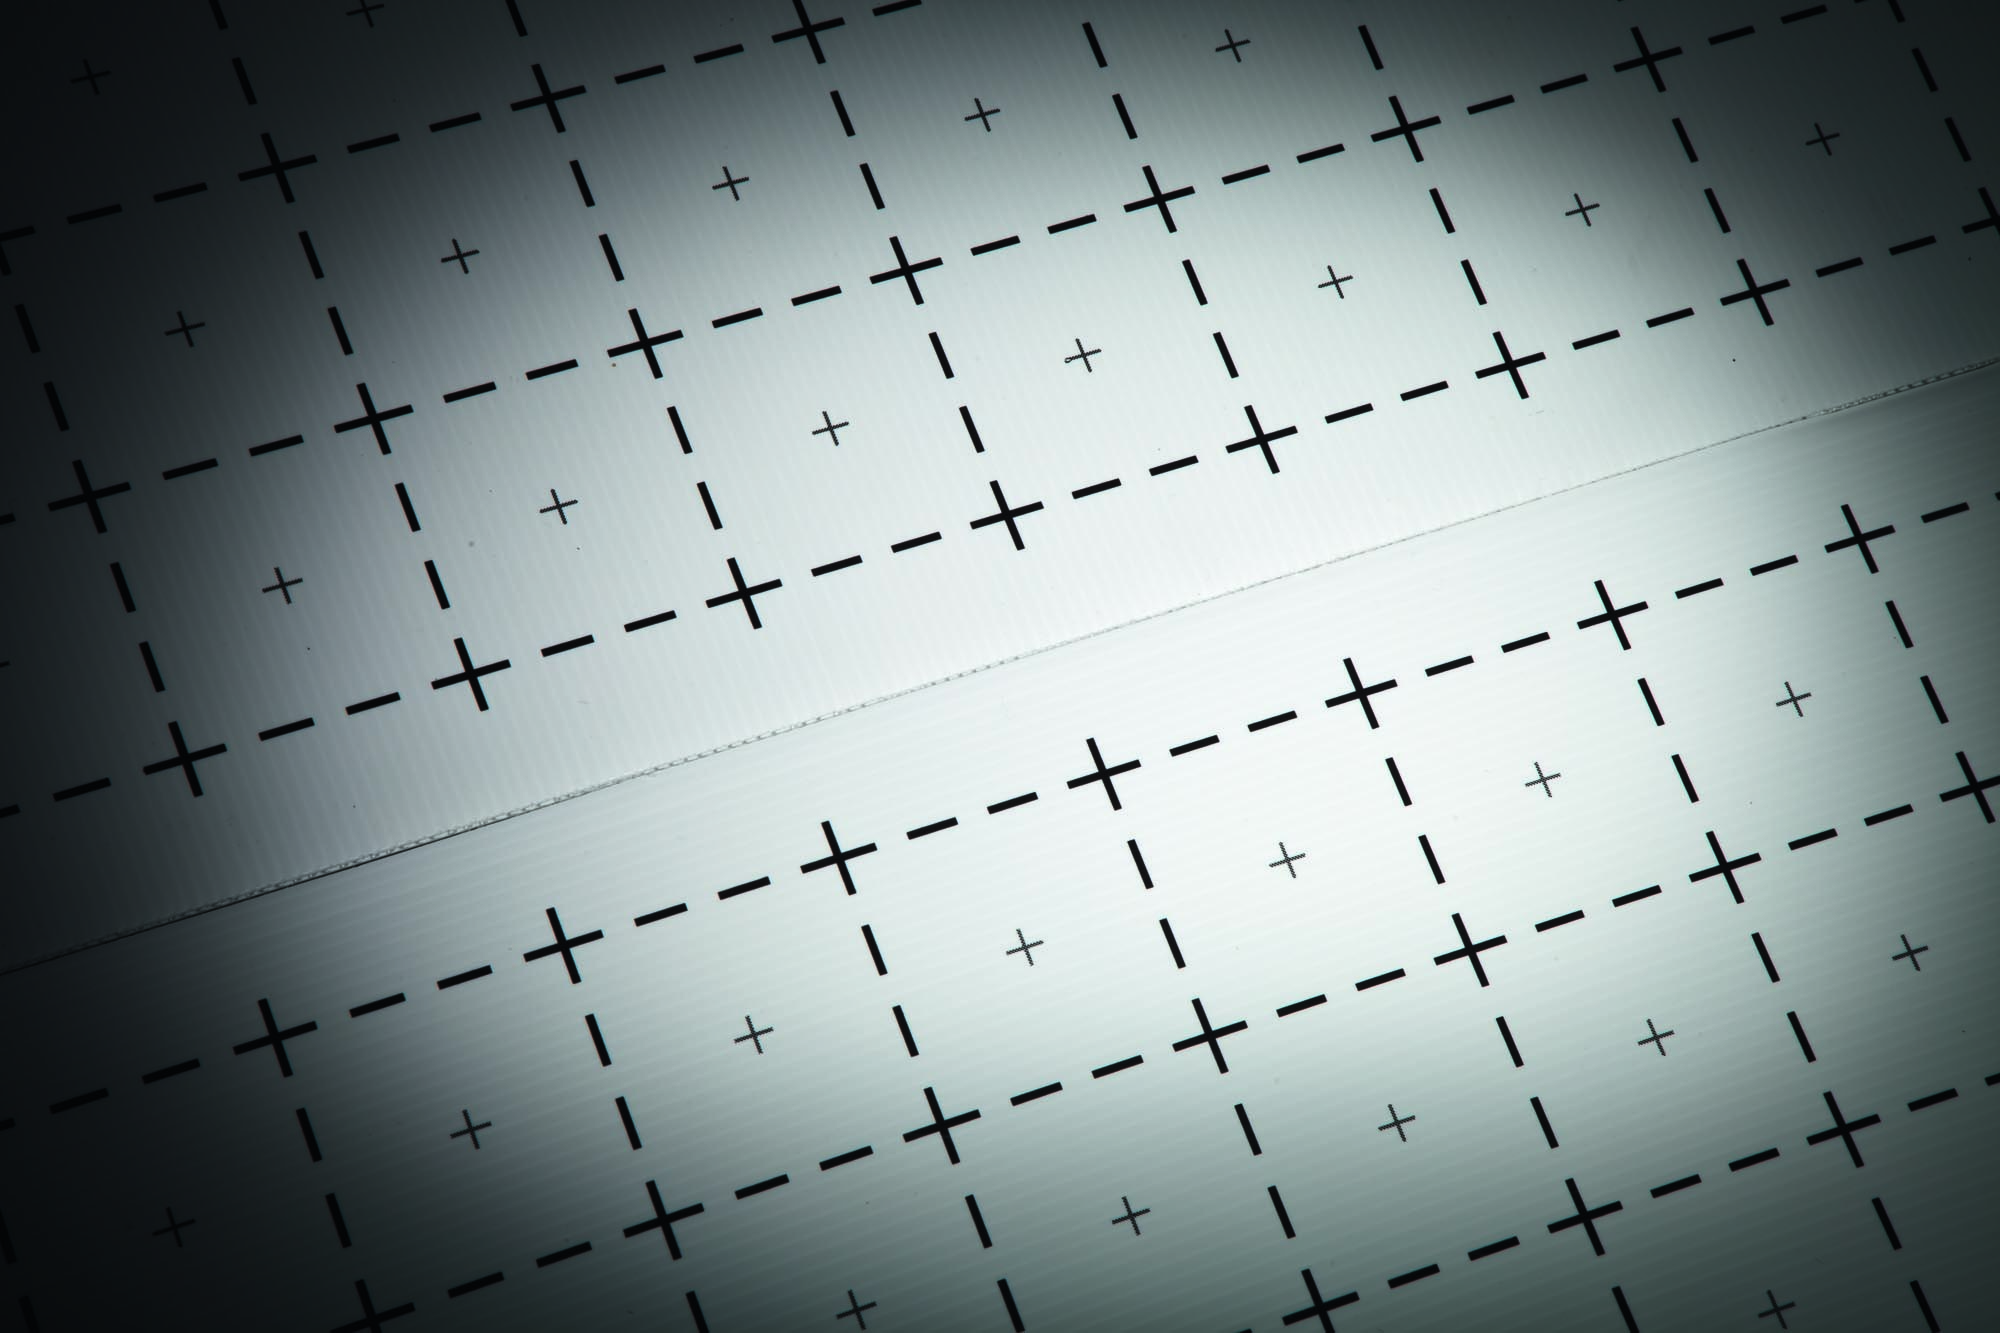 The printed marks on the Kermi x-net C16 clip panel indicate the cutting grid and pipe installation grid.